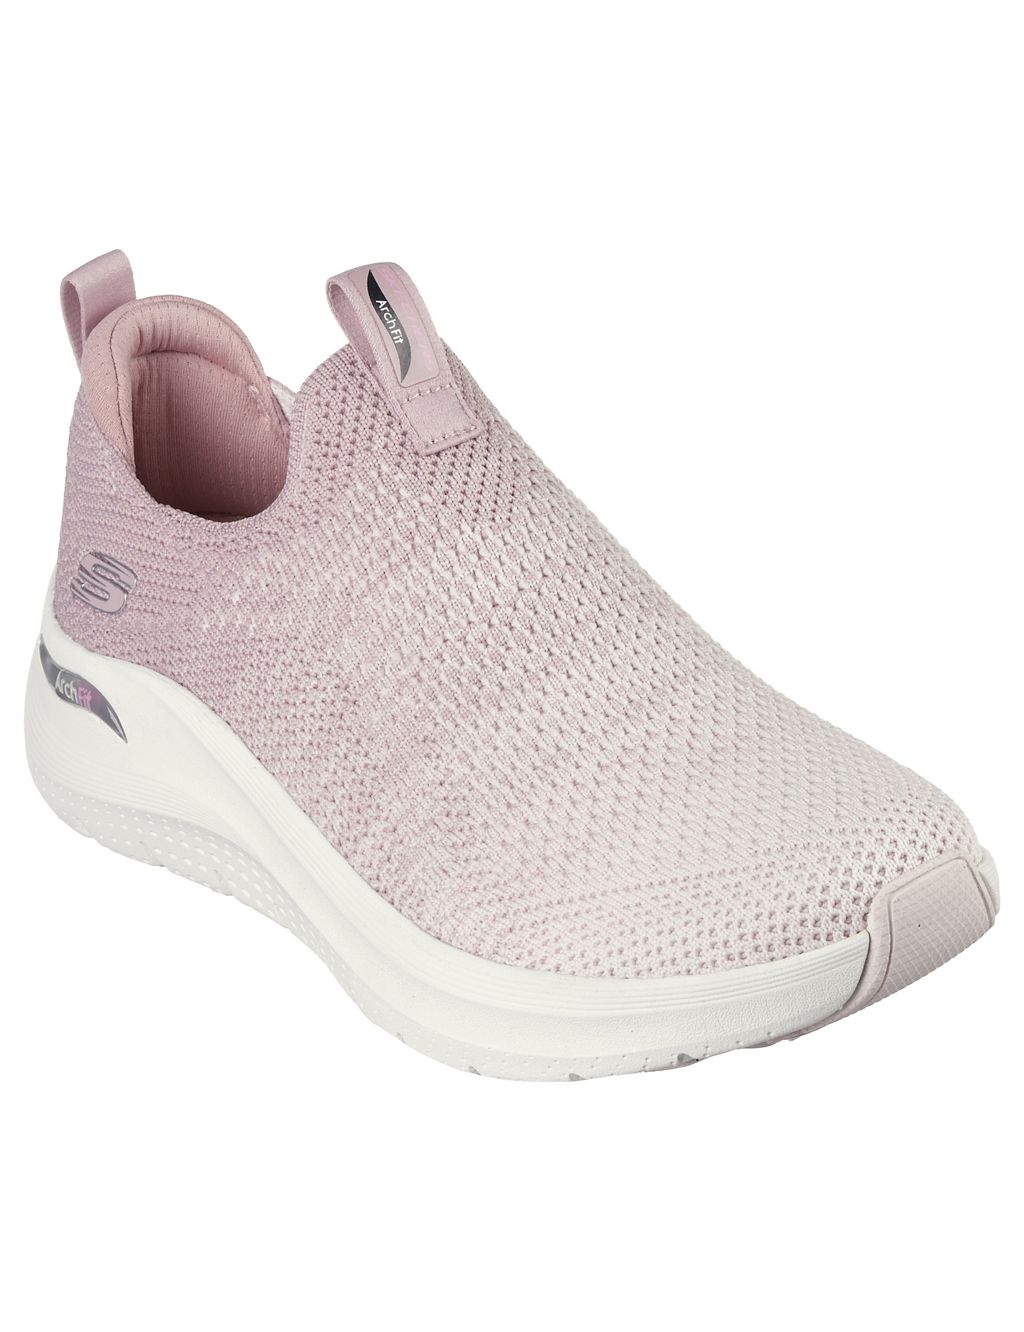 Arch Fit 2.0 Slip On Trainers 1 of 5